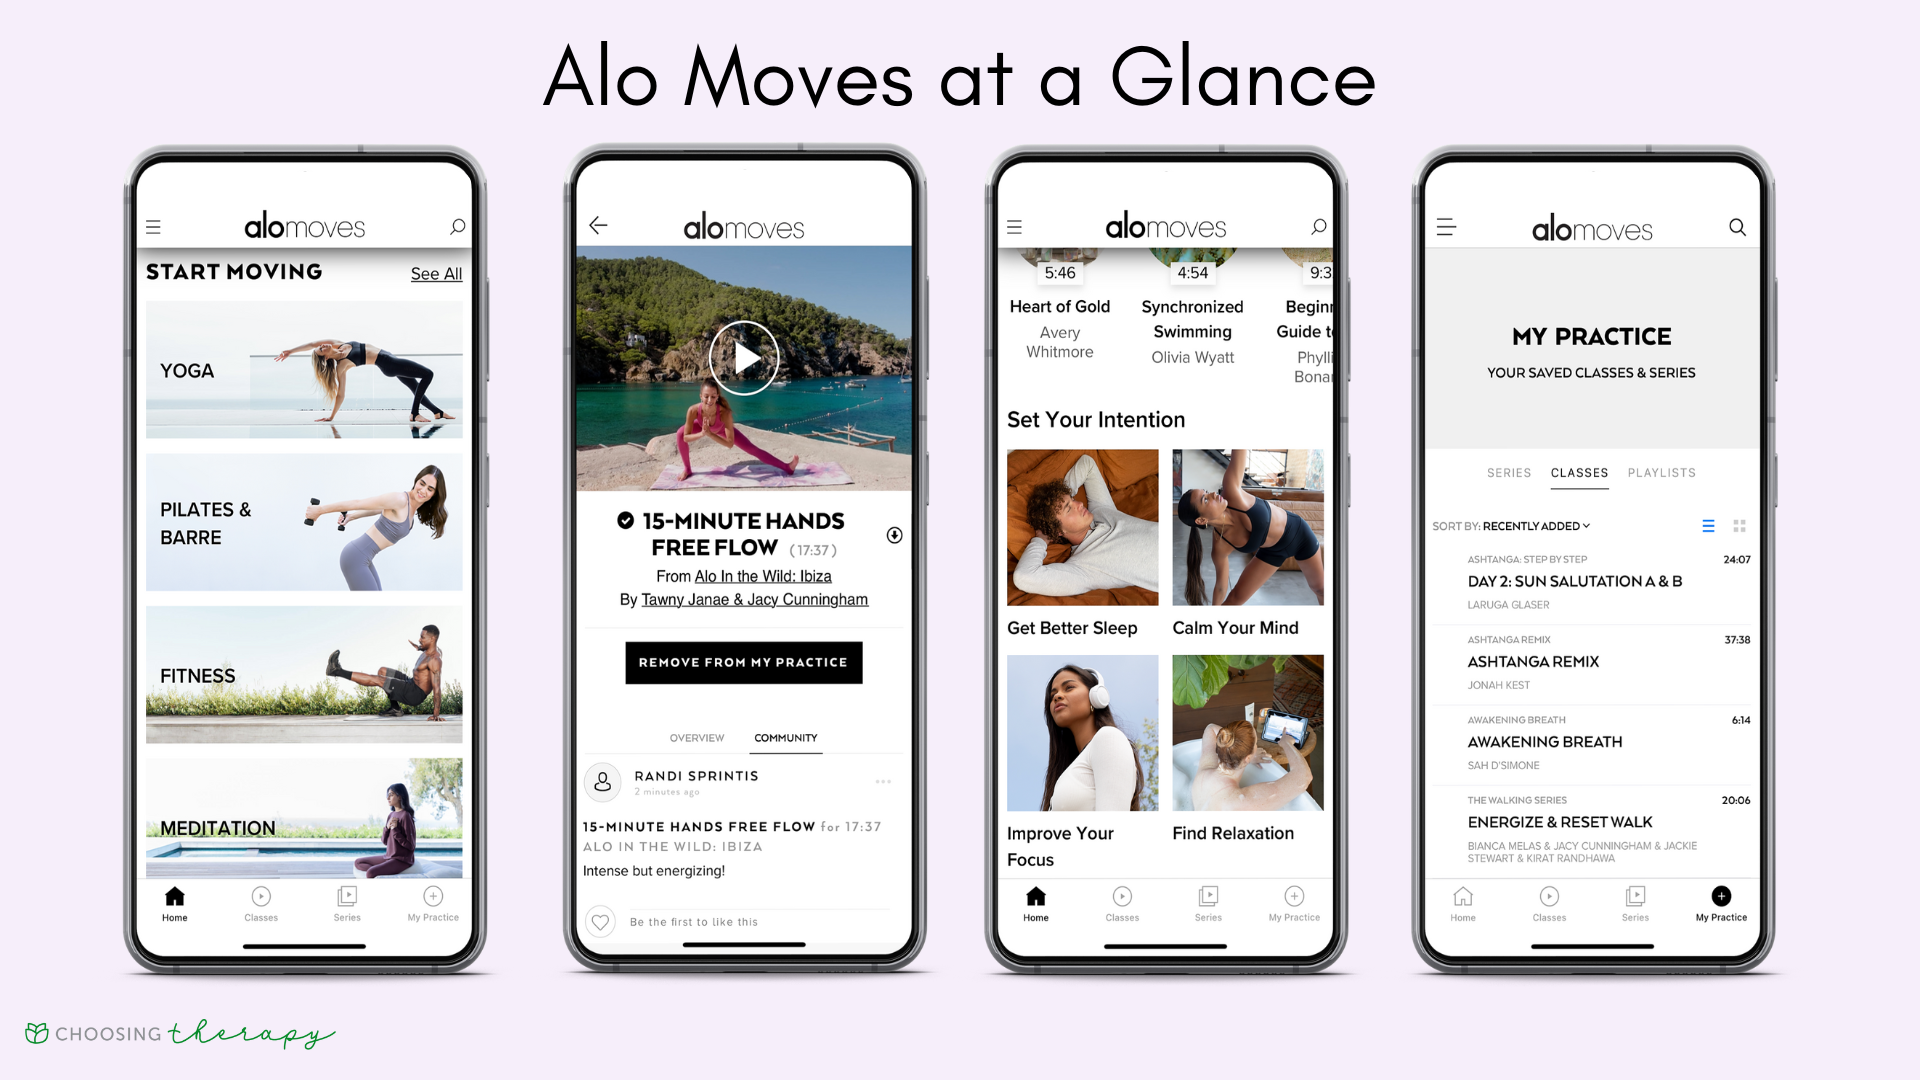 Alo Moves Review 2022 - Image of the key features of the Alo Moves yoga app, the home screen, what a class looks like, finding classes, and saved classes